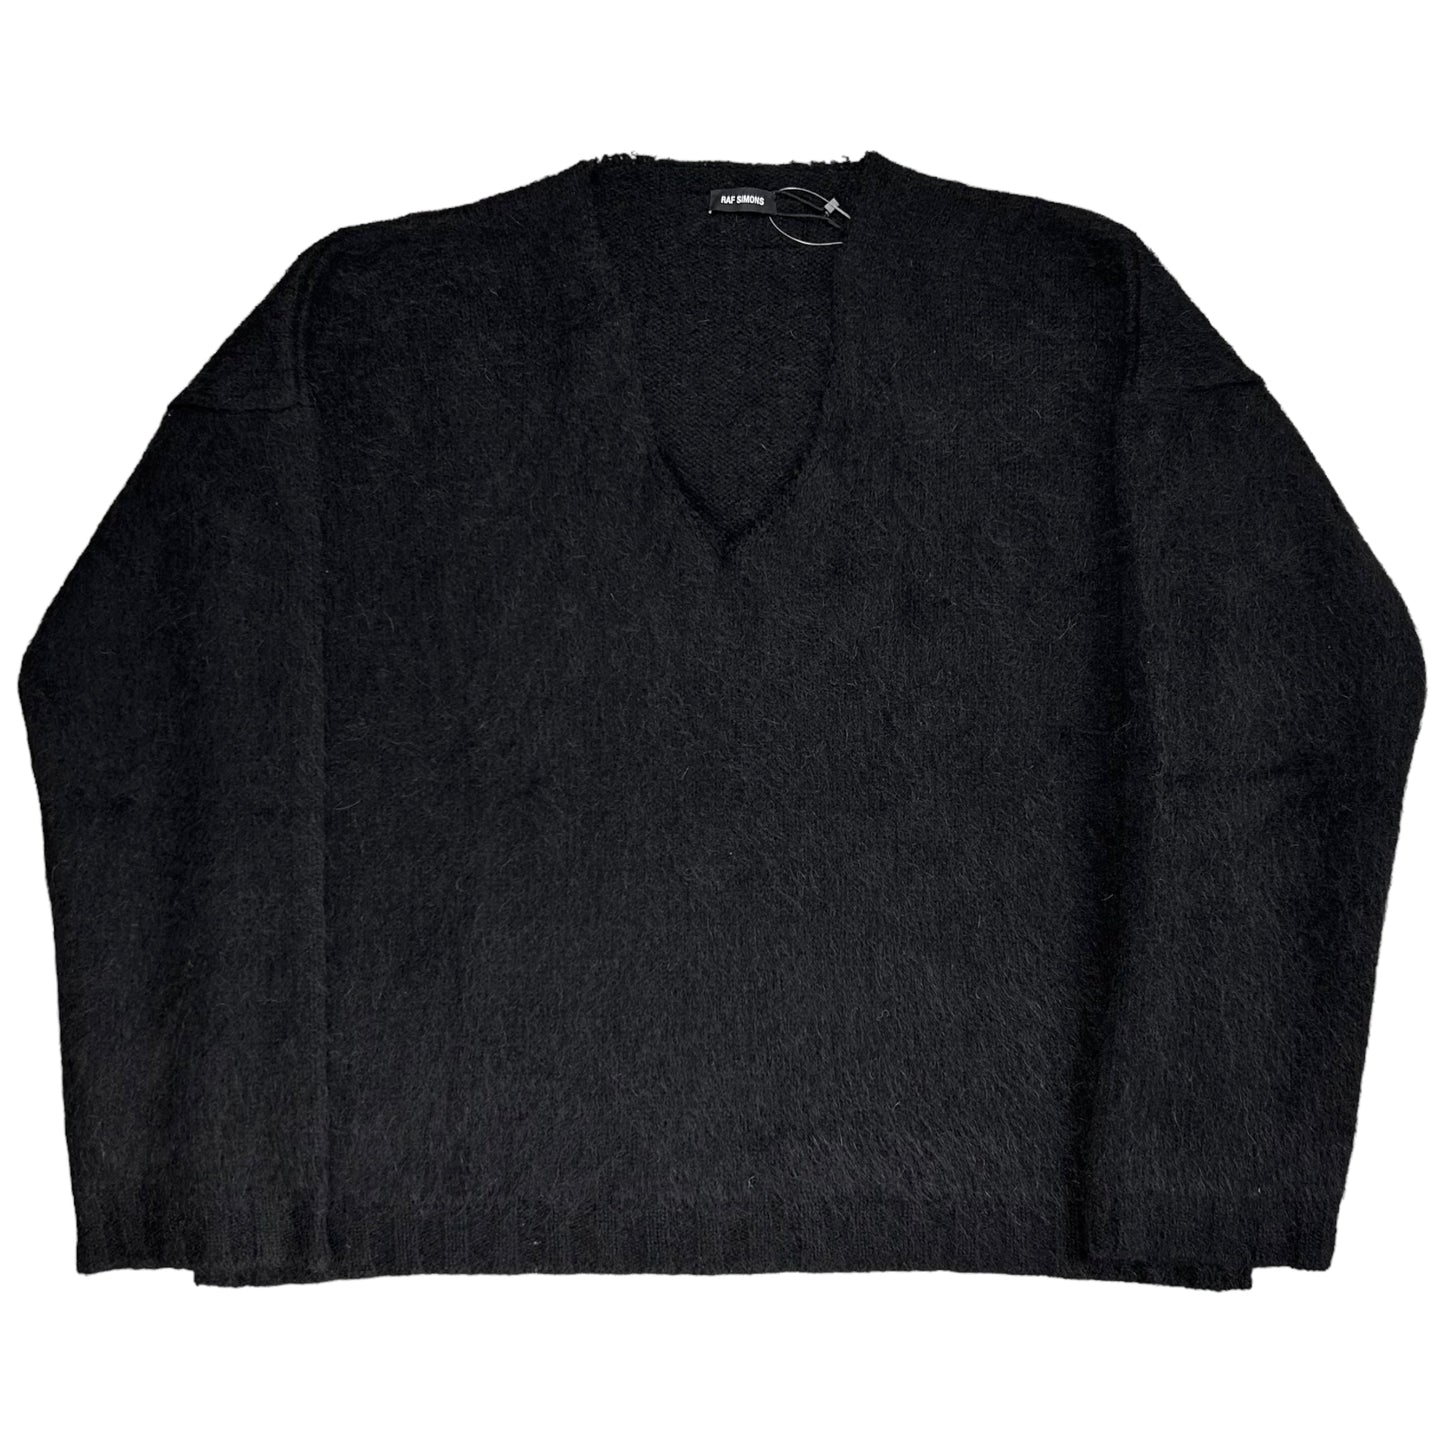 Raf Simons 21aw Oversized boiled knit新品未使用タグ付き